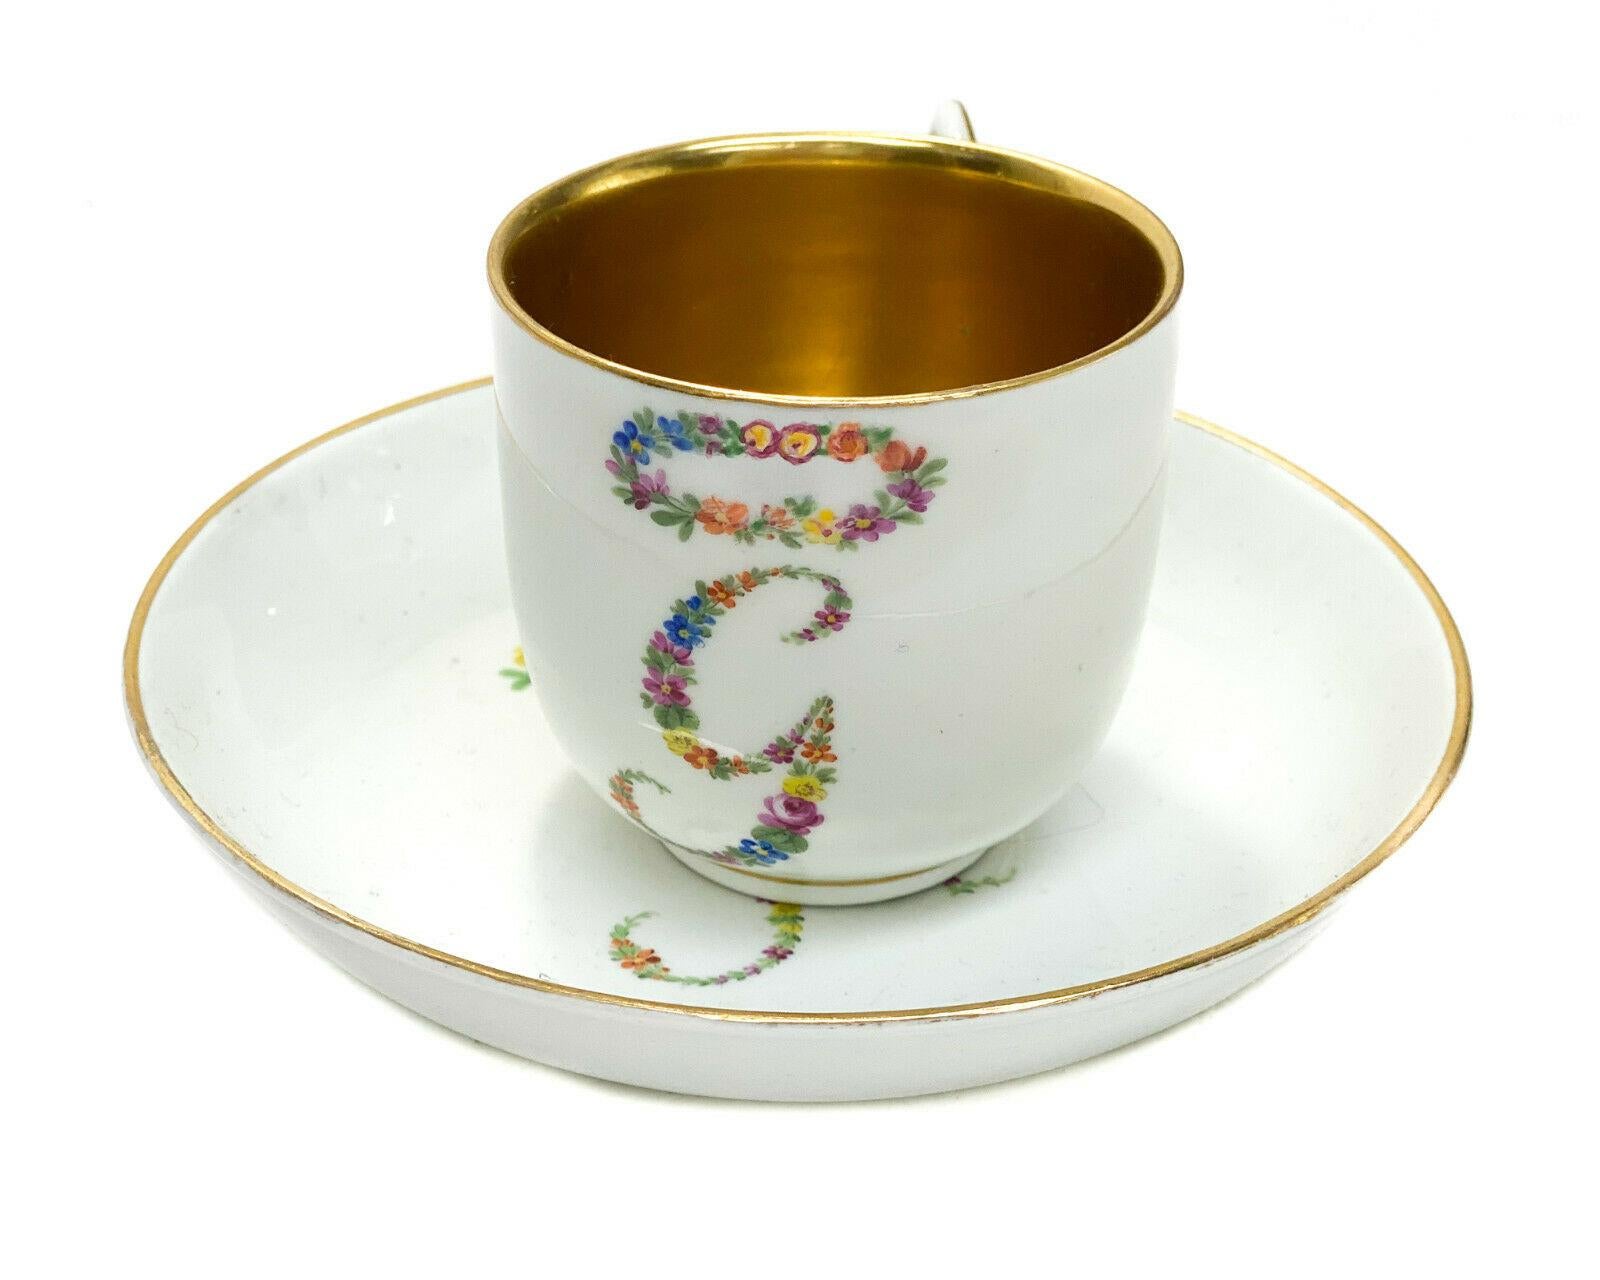 Imperial Royal Vienna Factory Austrian hand painted porcelain cup & saucer, 1787

Hand painted flowers in a monogram G and A with a halo. Imperial Royal Vienna beehive mark to the underside.

Additional information:
Time Period Manufactured: